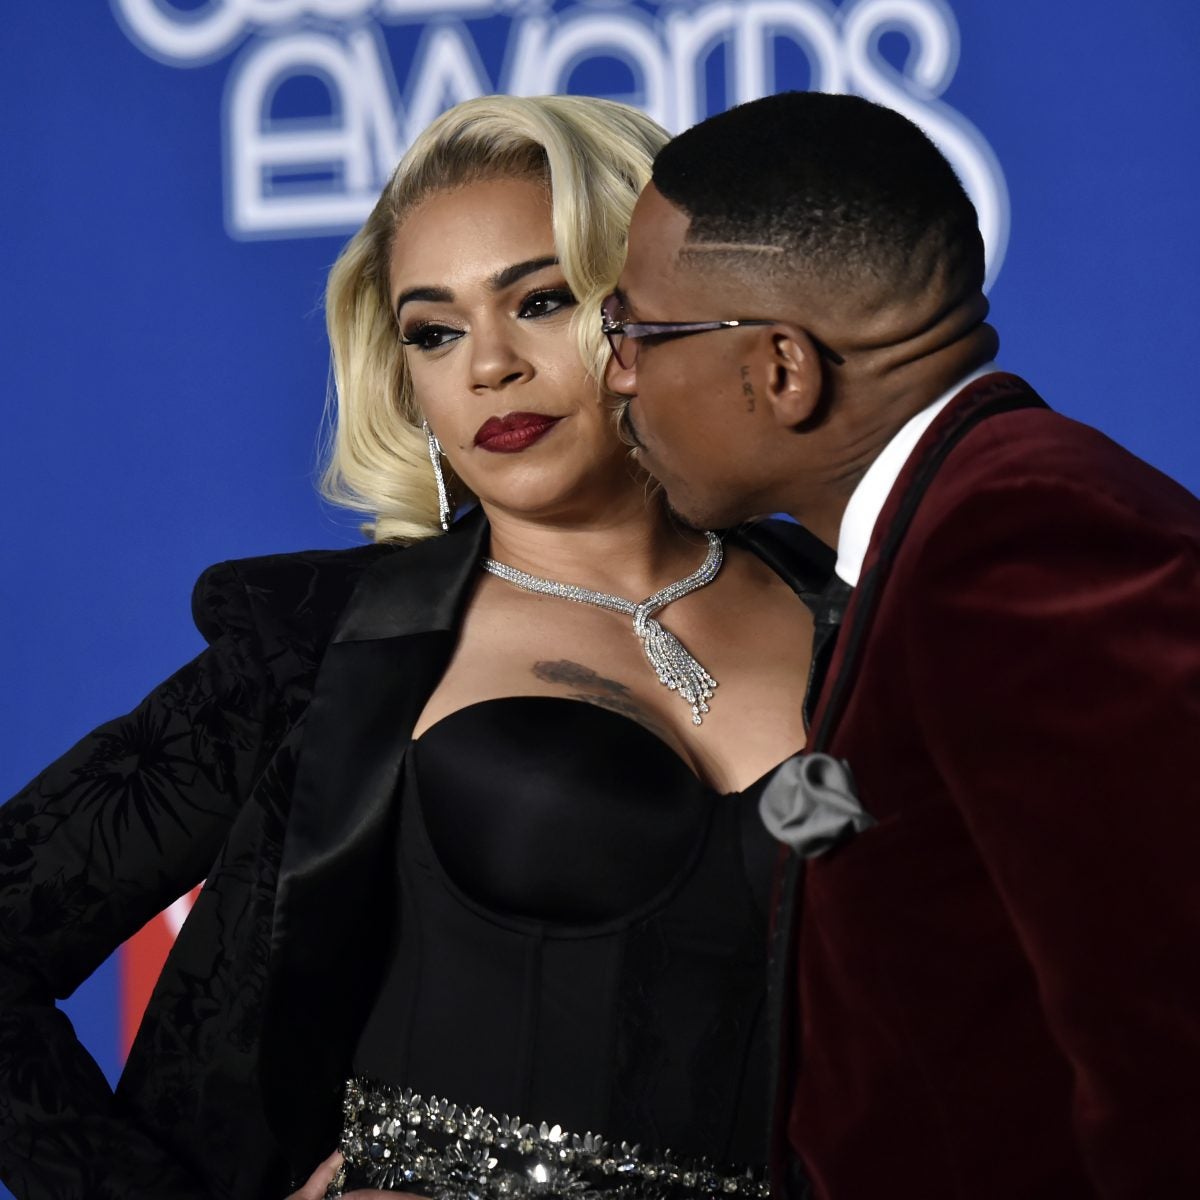 Stevie J Issues Public Apology After Video Surfaces Of Him 'Publicly Humiliating' Wife Faith Evans